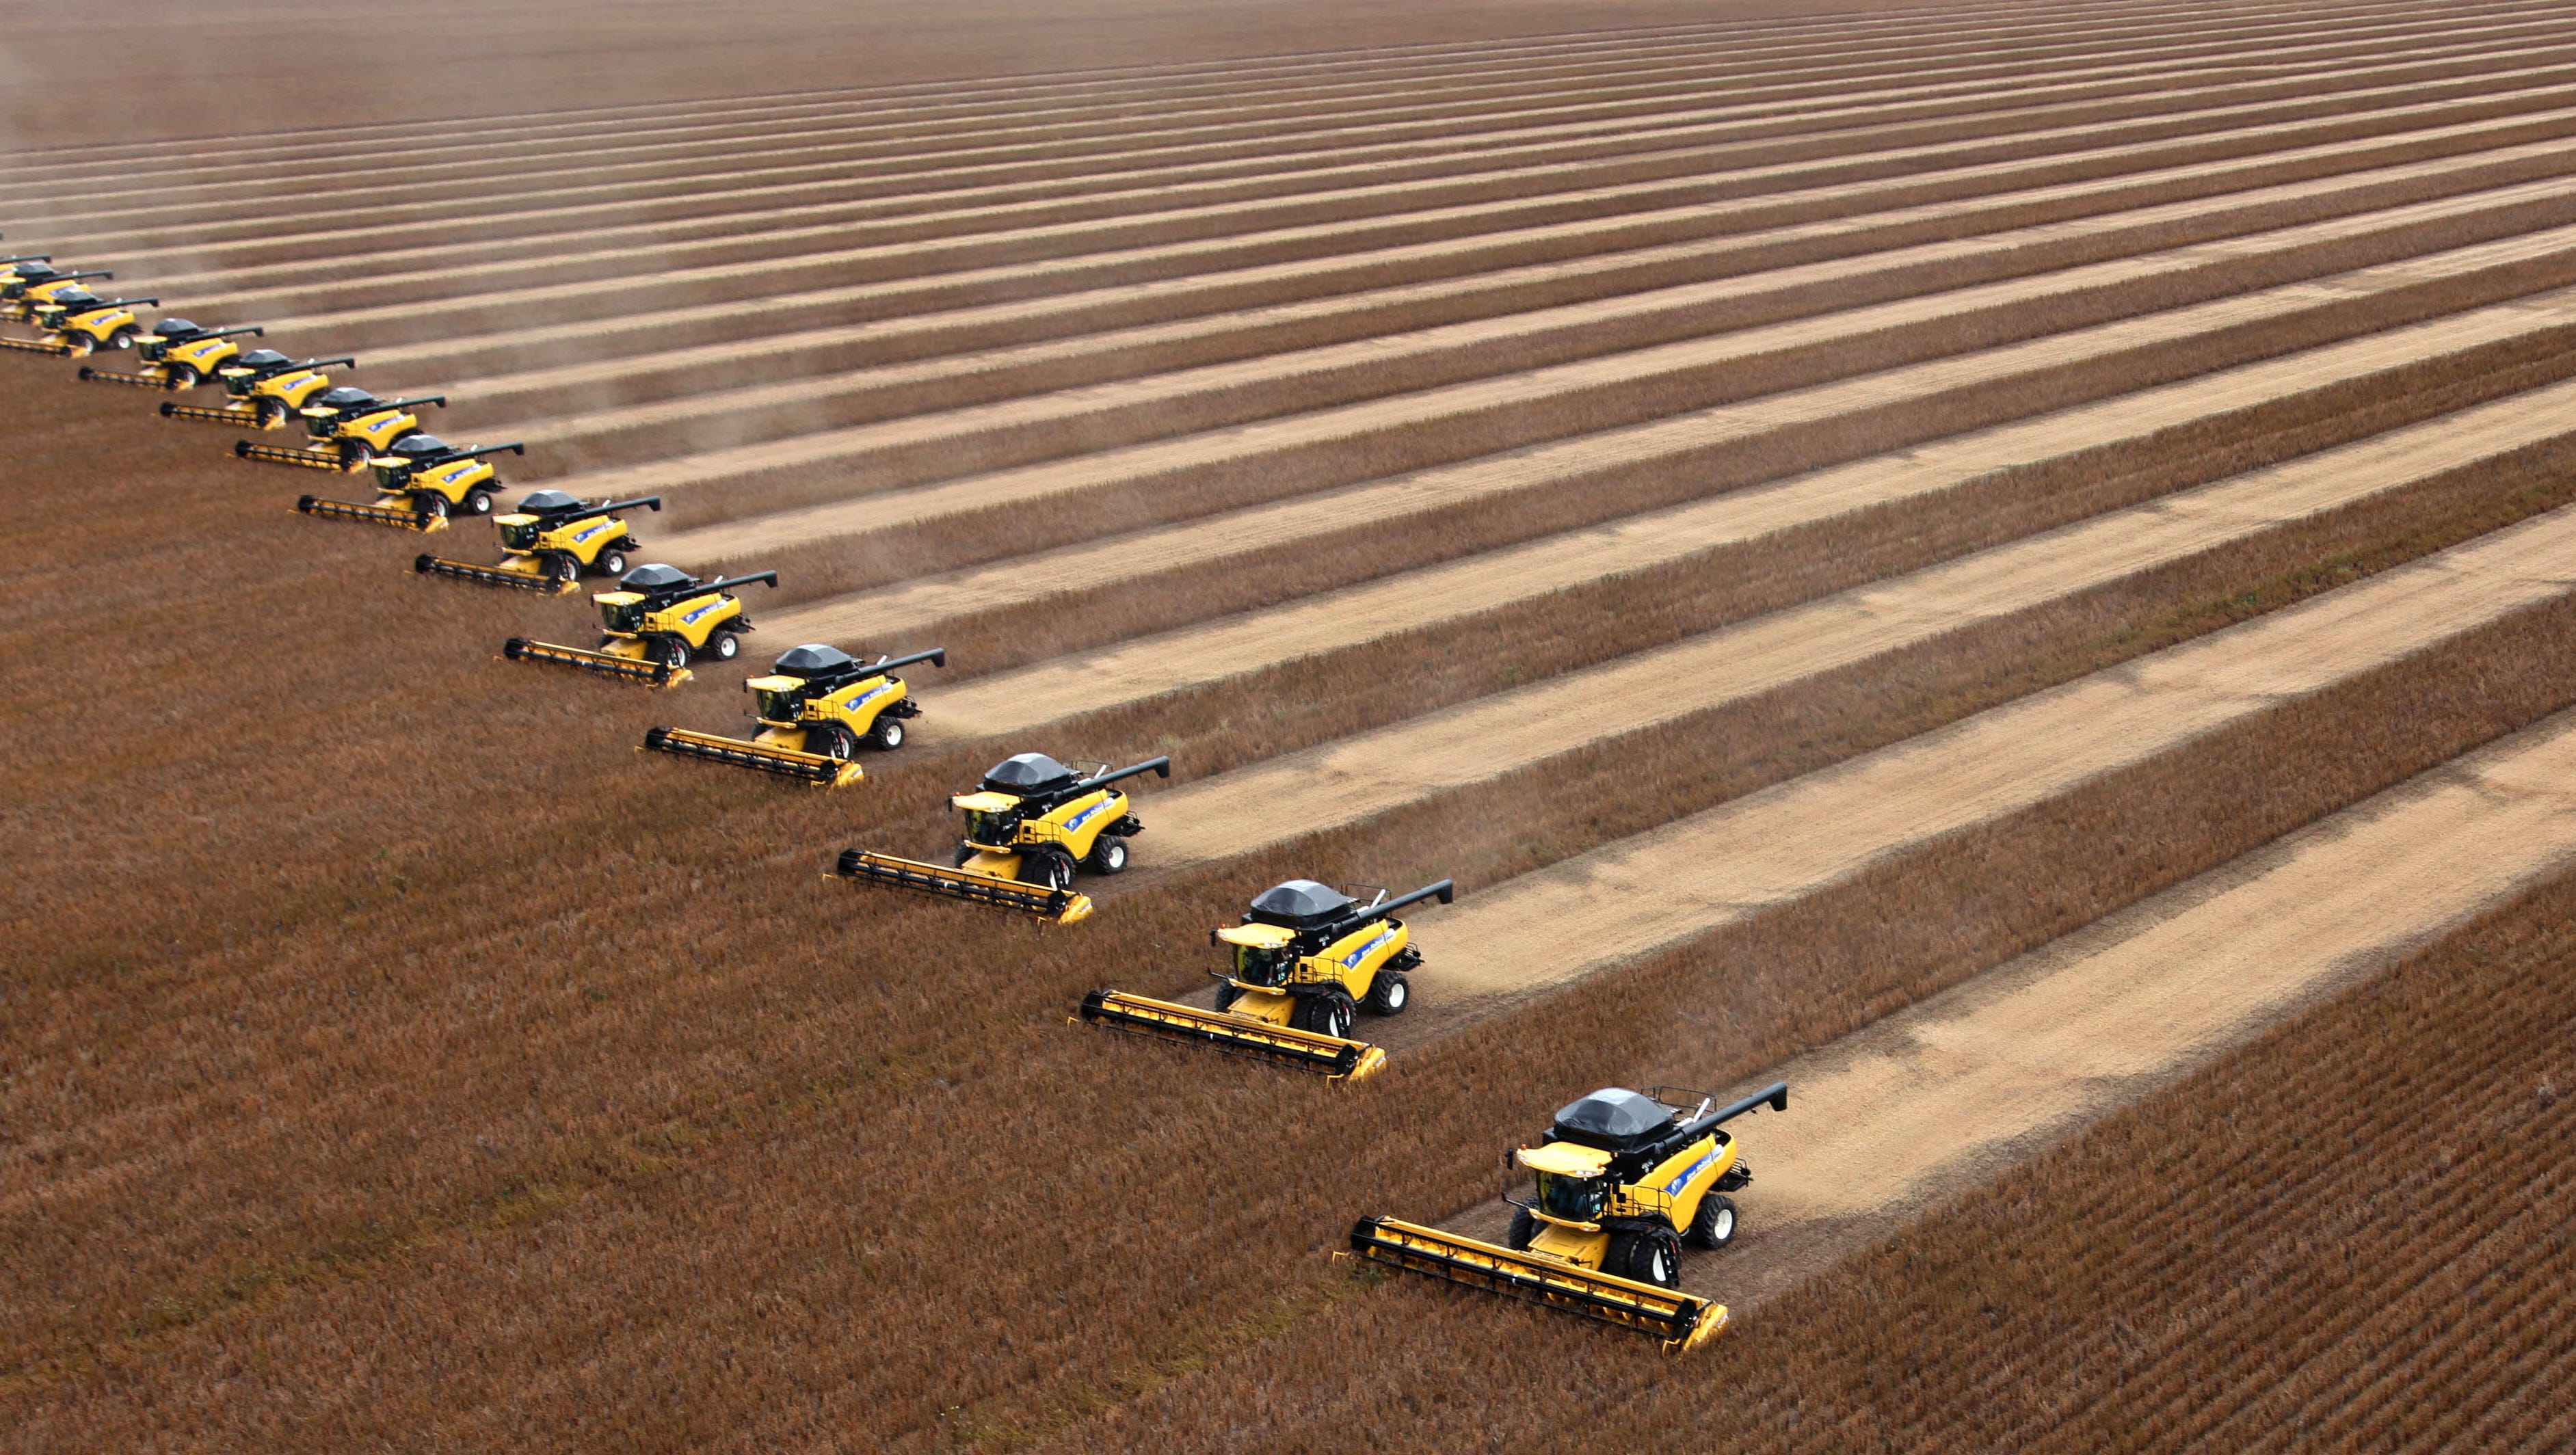 Workers on tractors harvest soybeans in Correntina, northern Brazil. Brazil is the world's largest soy producer, passing the U.S. in May 2020. A continuing drought in South America could impact the country's soybean production.